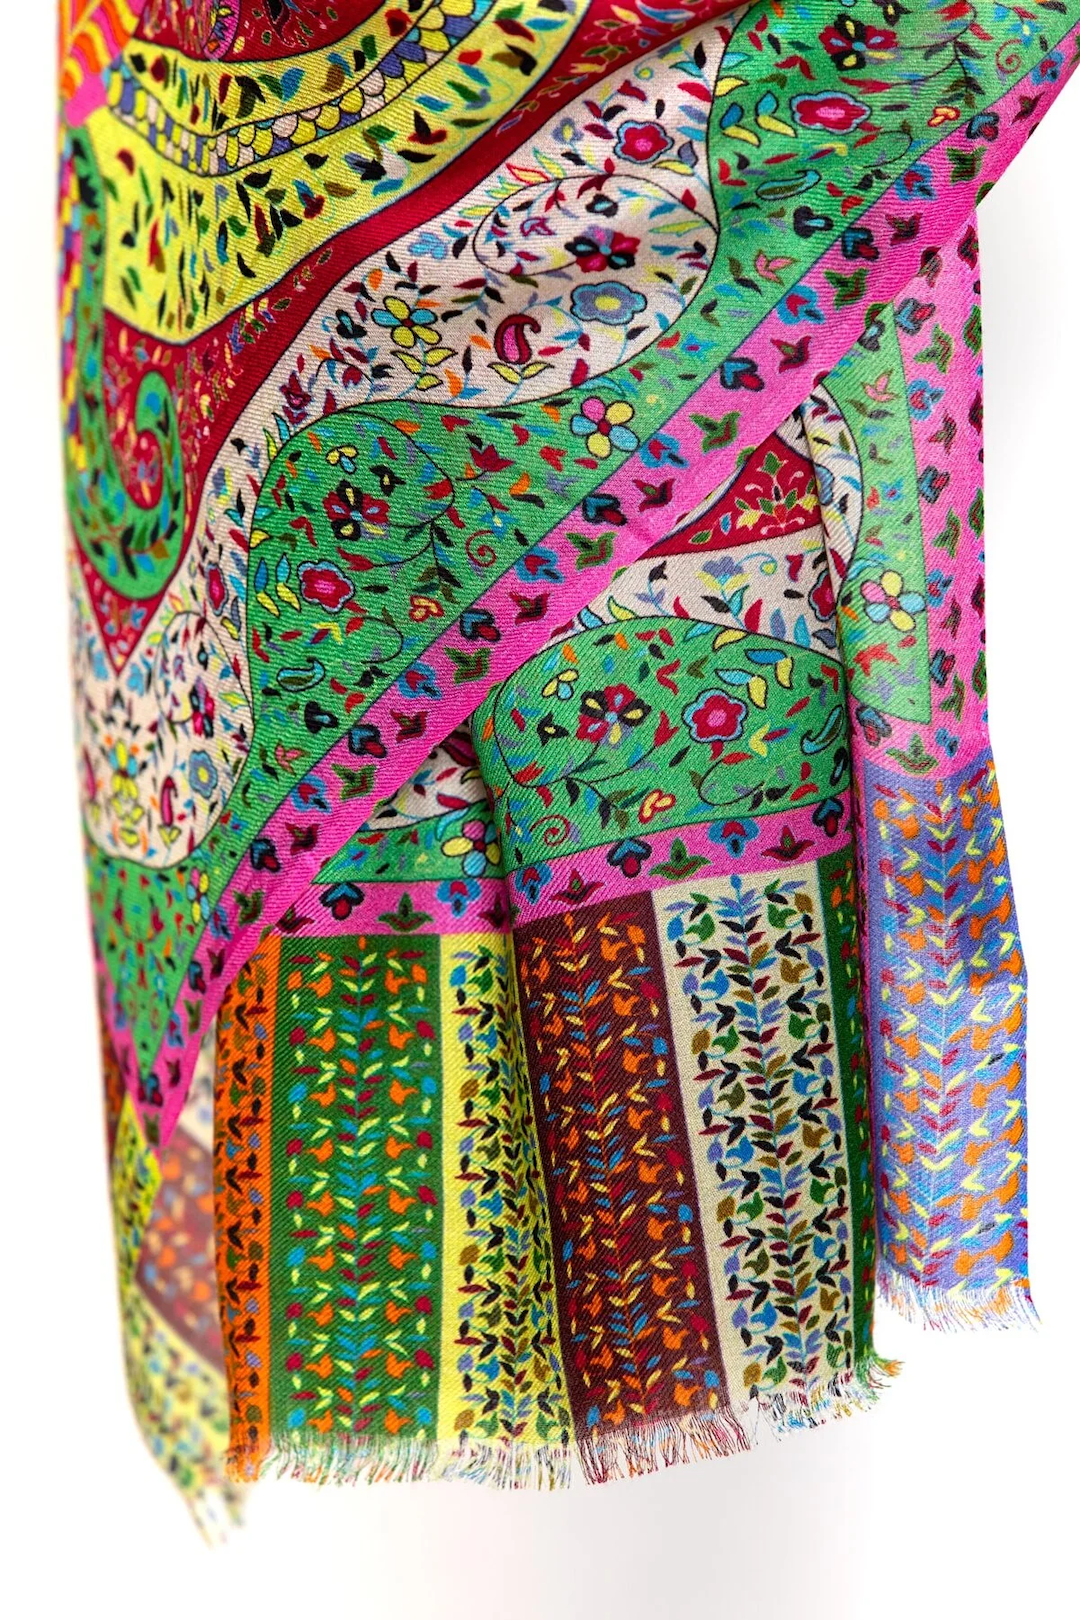 Micro Modal Cashmere Printed Embroidery Shawl Mo-Shmere - Funky Paisley